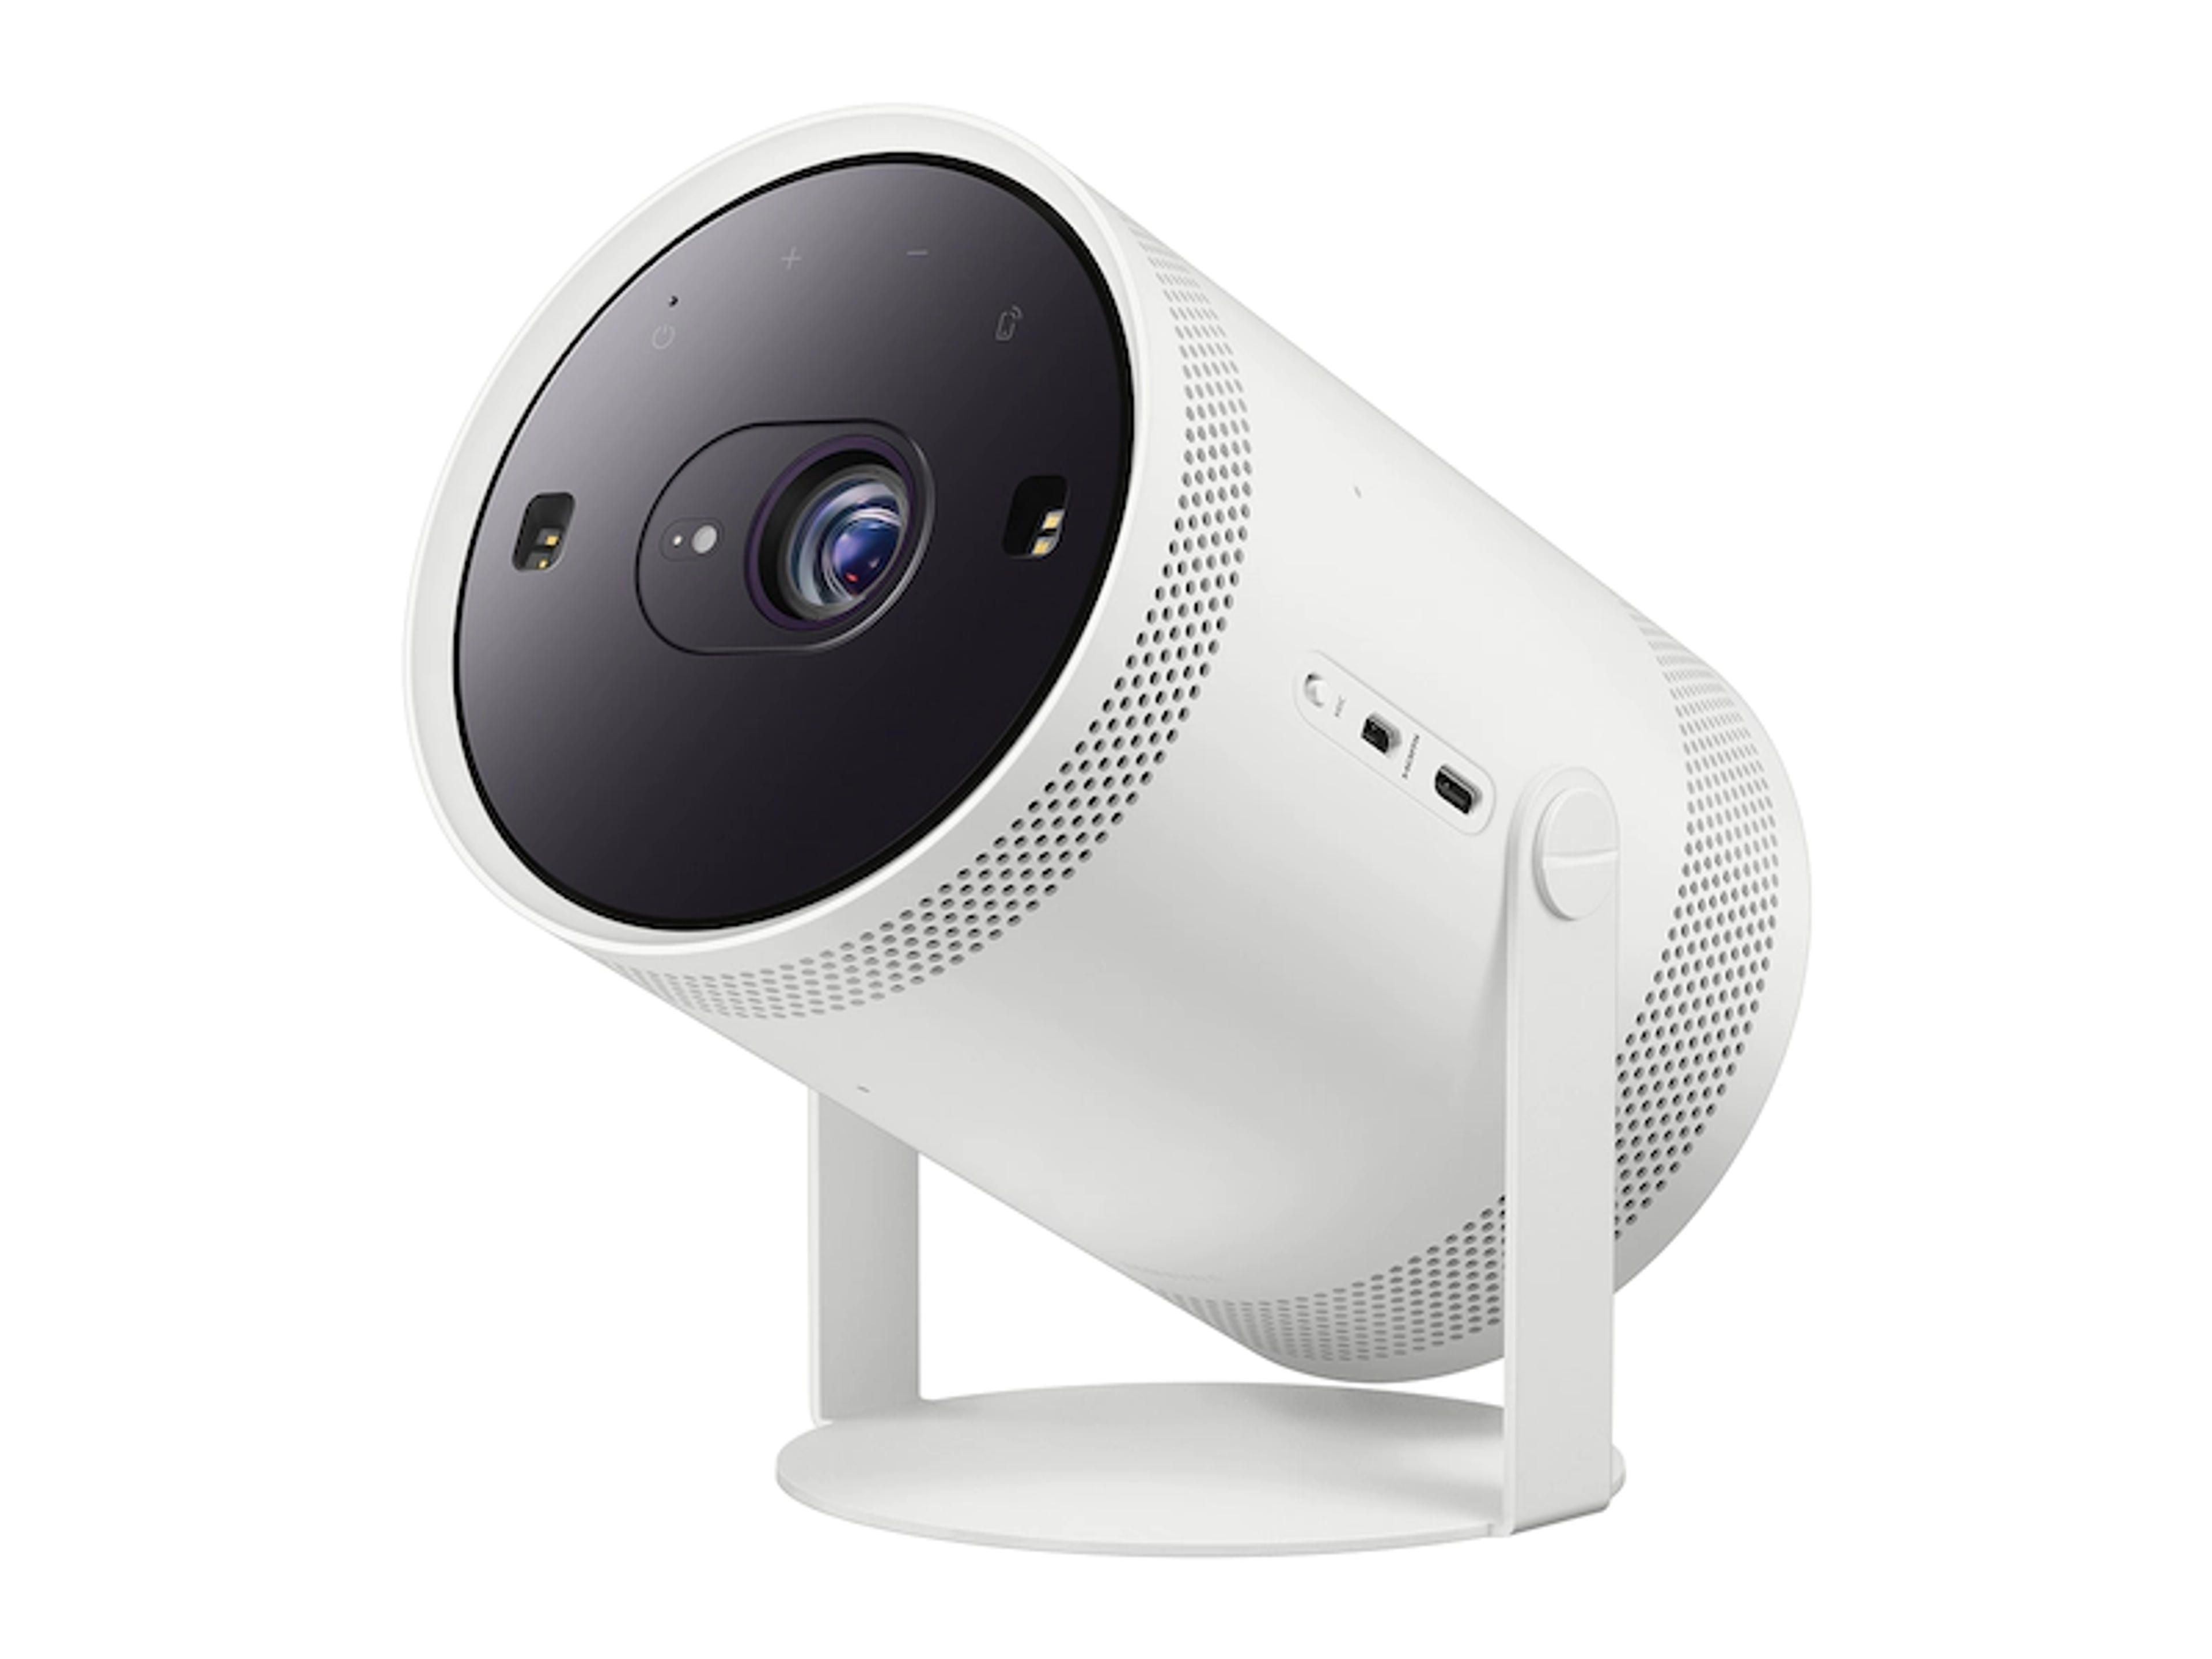 Projector & Smart Theater To Go | The Freestyle | Samsung US